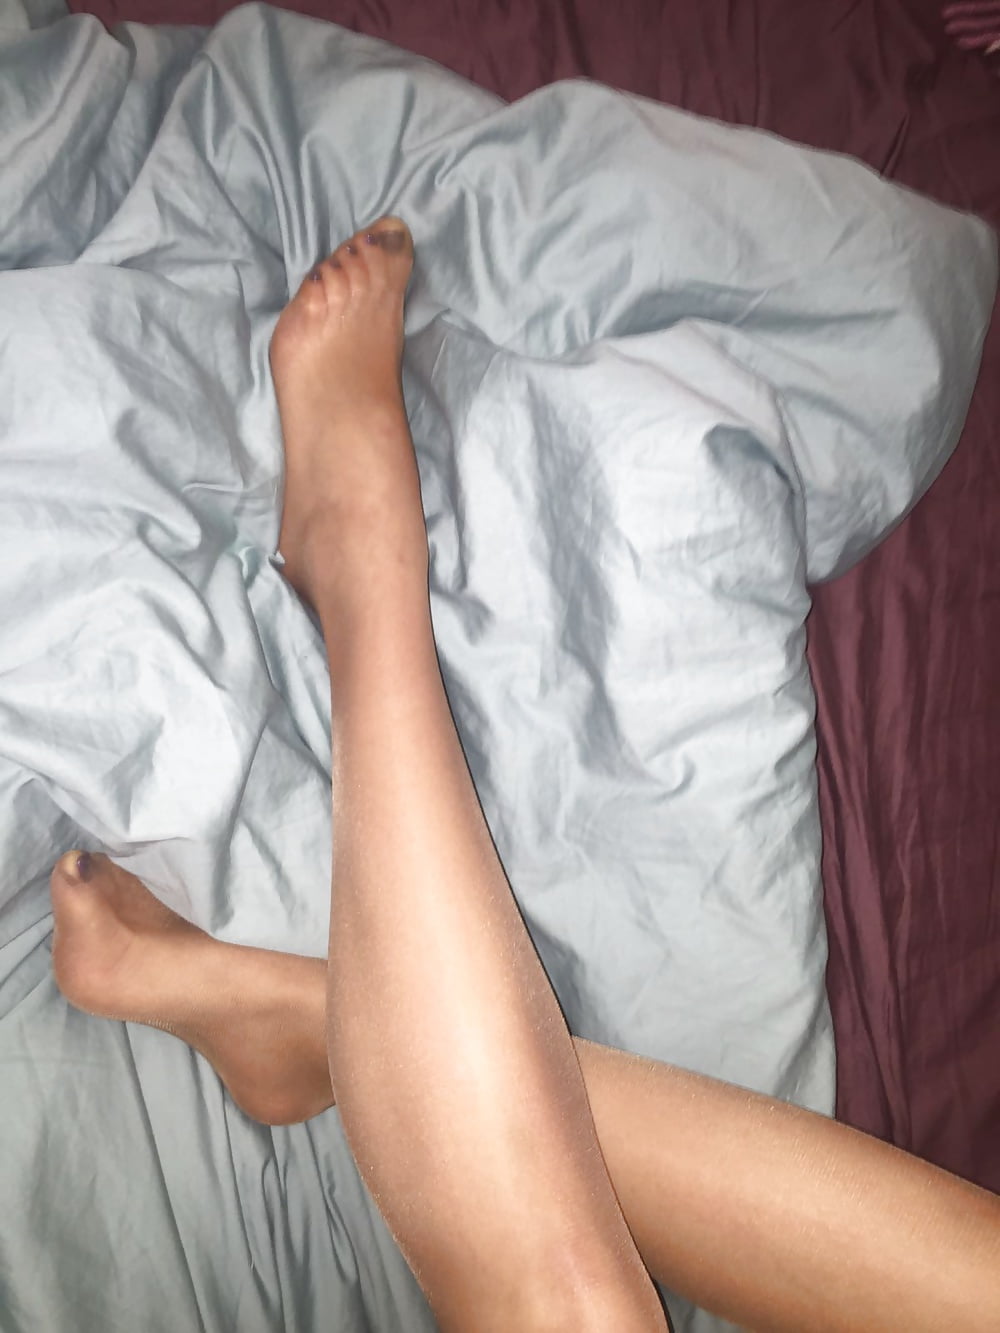 stocking and pantyhose legs and feet porn pictures